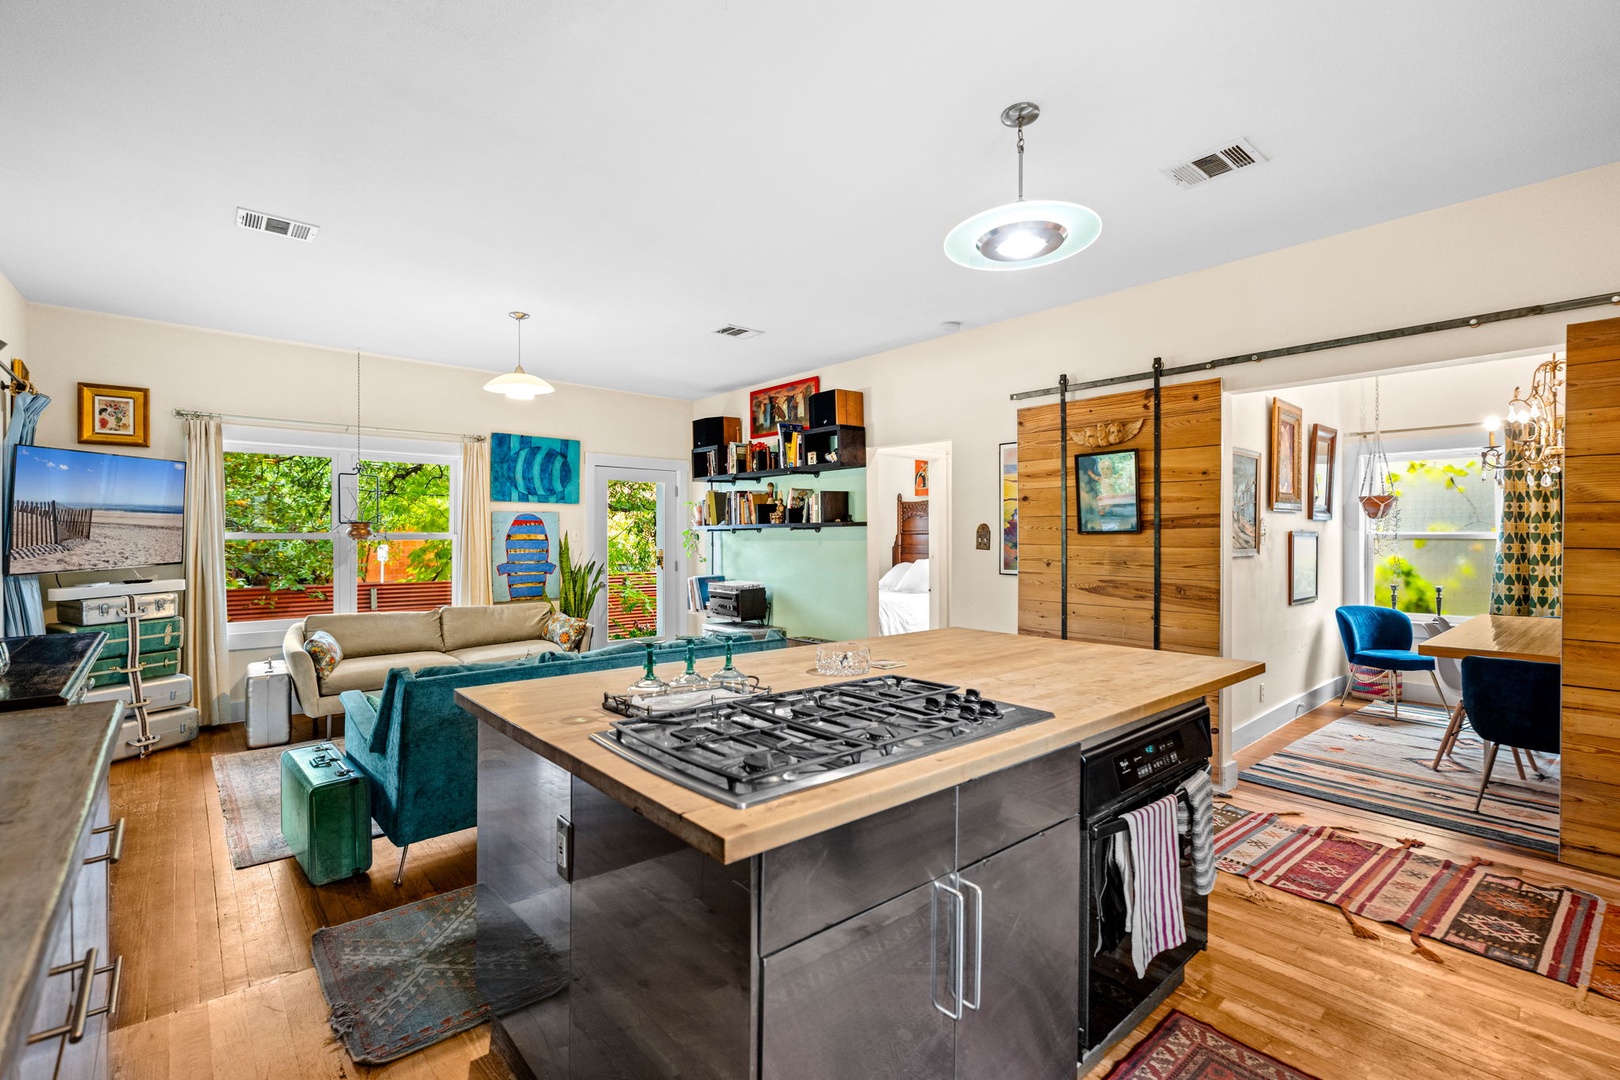 Enjoy the open layout between this home’s living, dining, & kitchen spaces